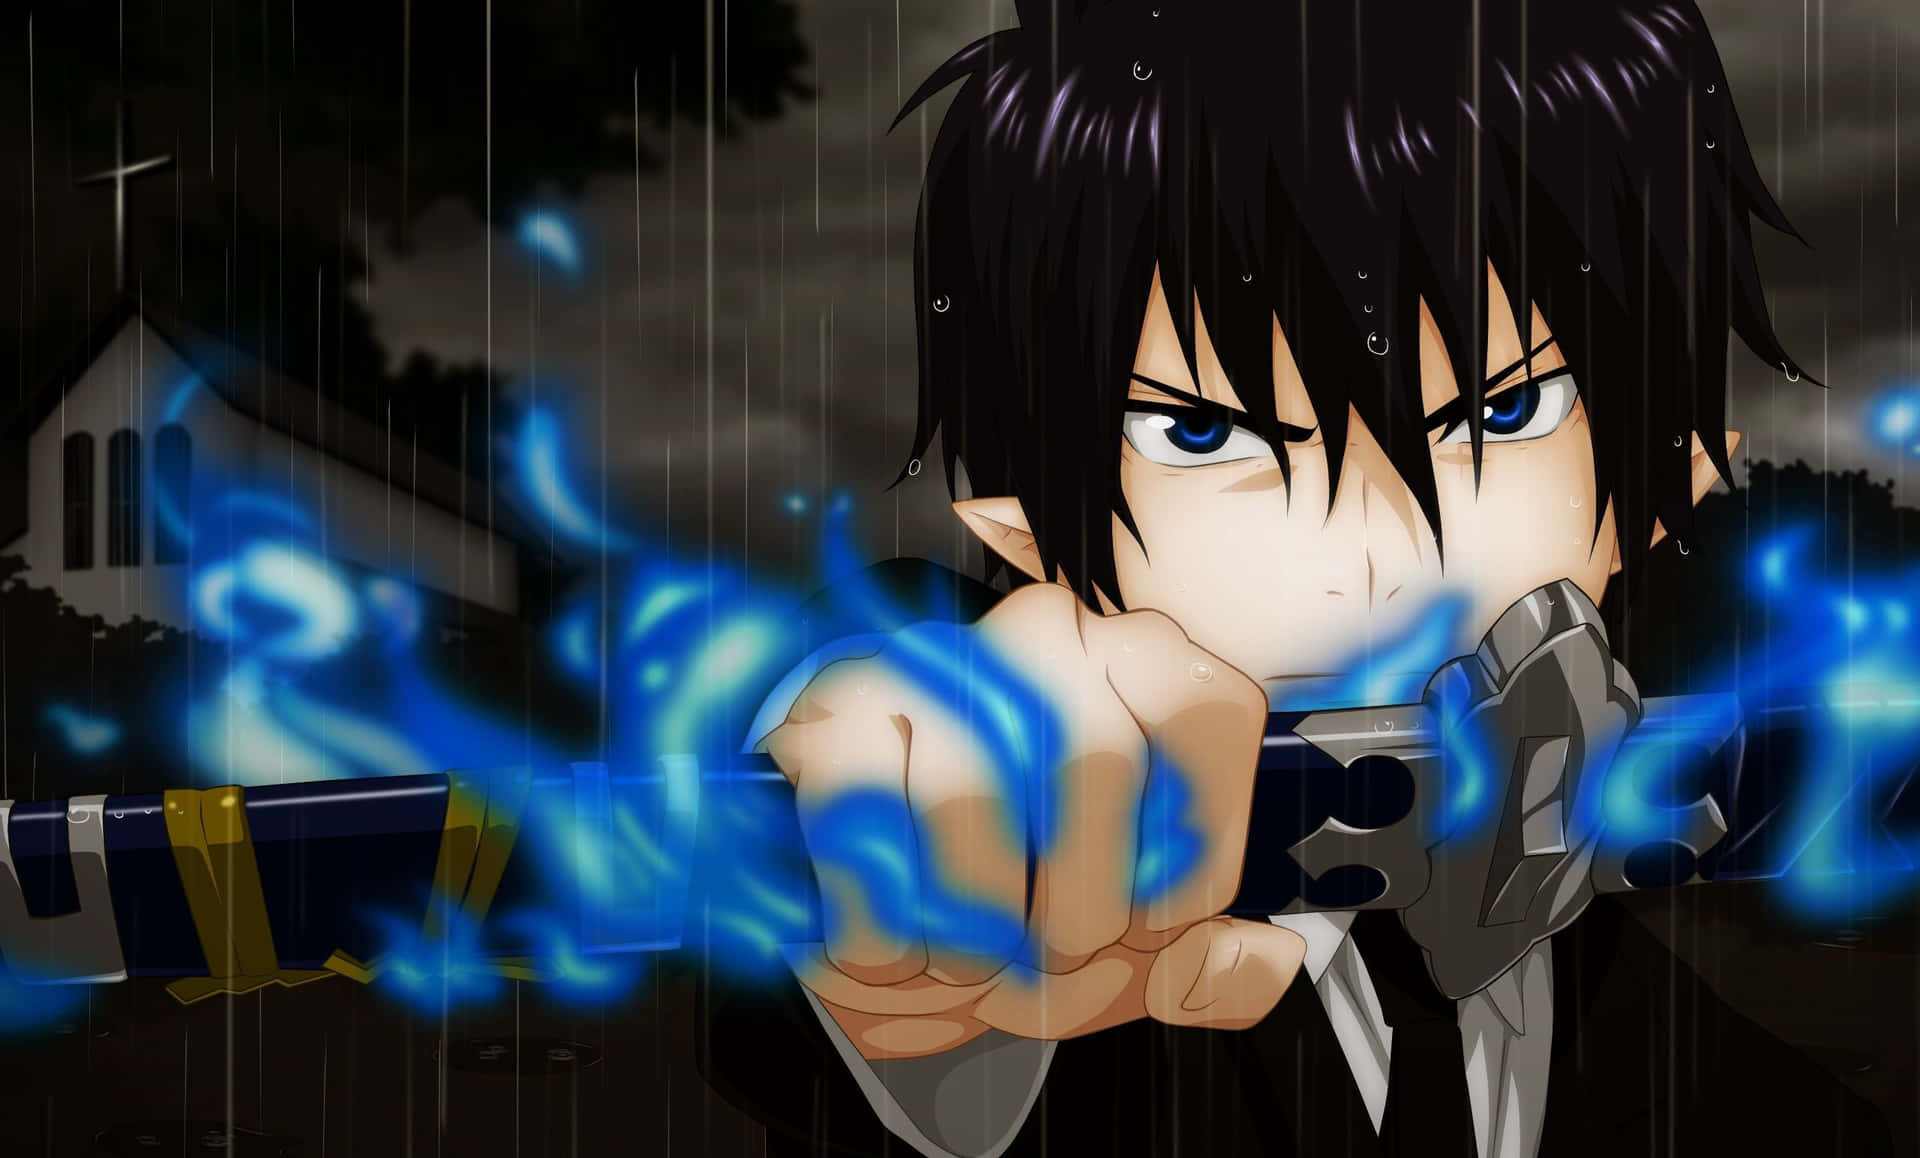 The Heart of the Mysterious Blue Exorcist